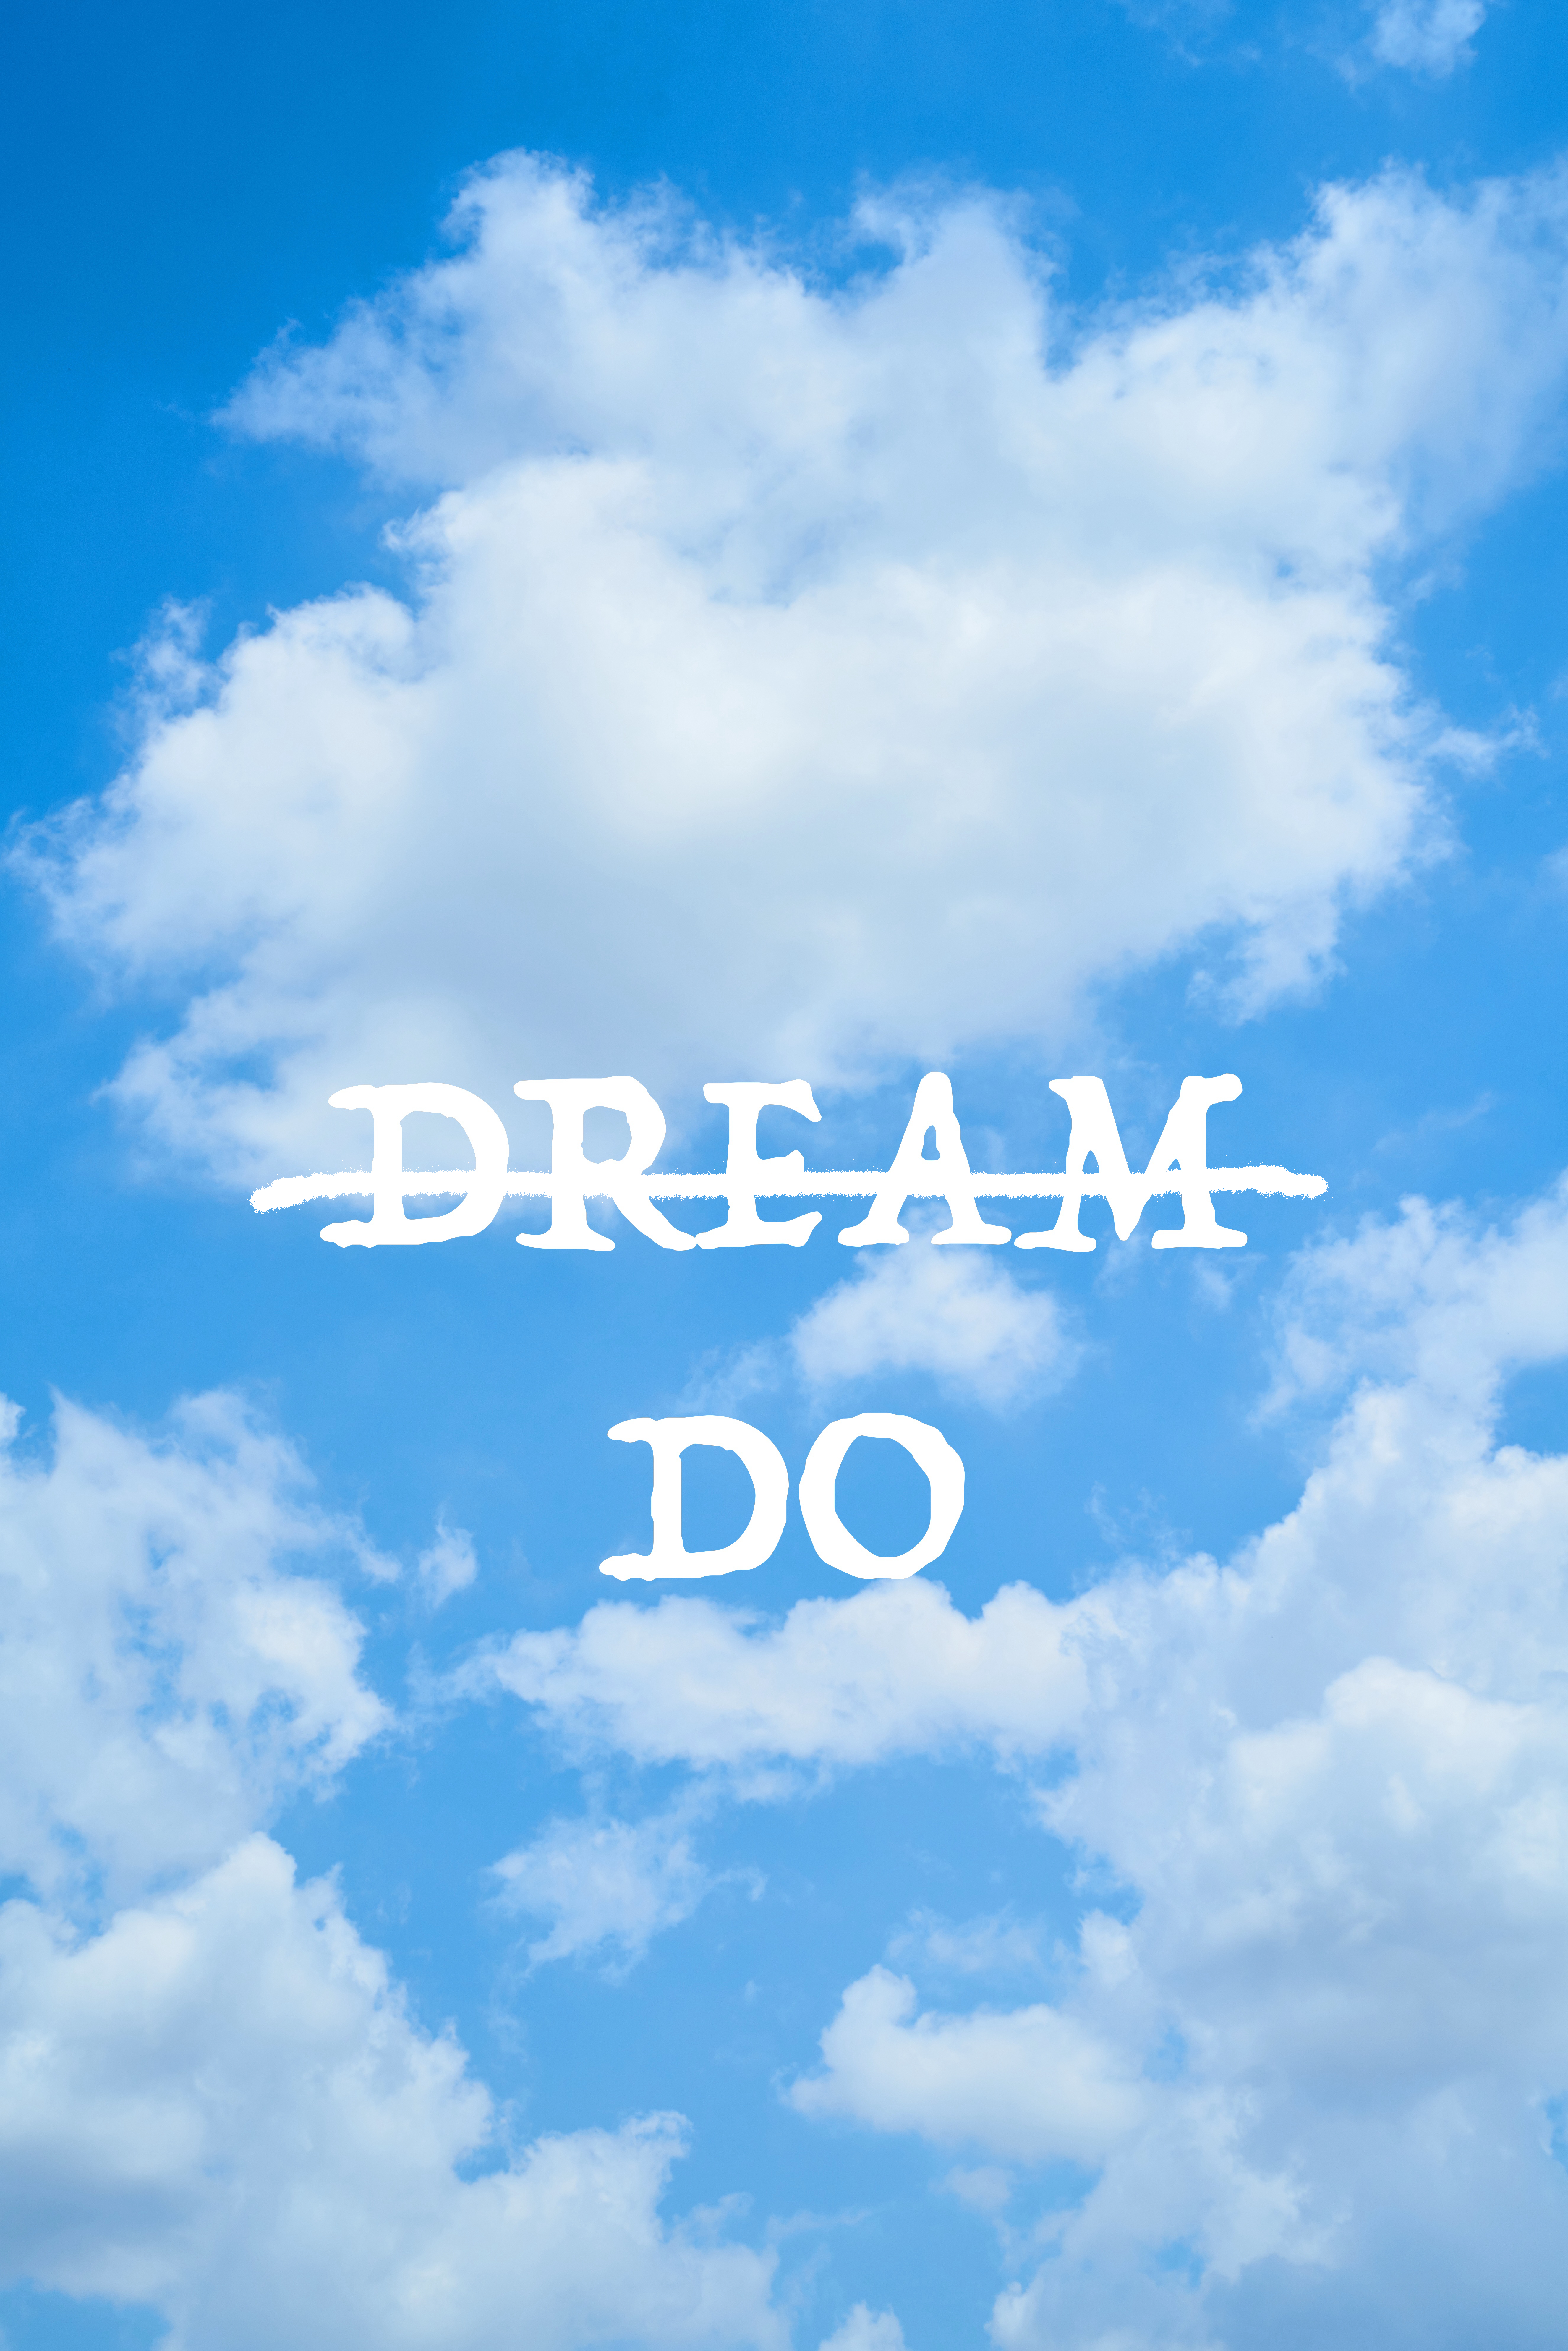 103391 download wallpaper sky, clouds, words, inscription, motivation, inspiration, dreams, reverie, action, act screensavers and pictures for free